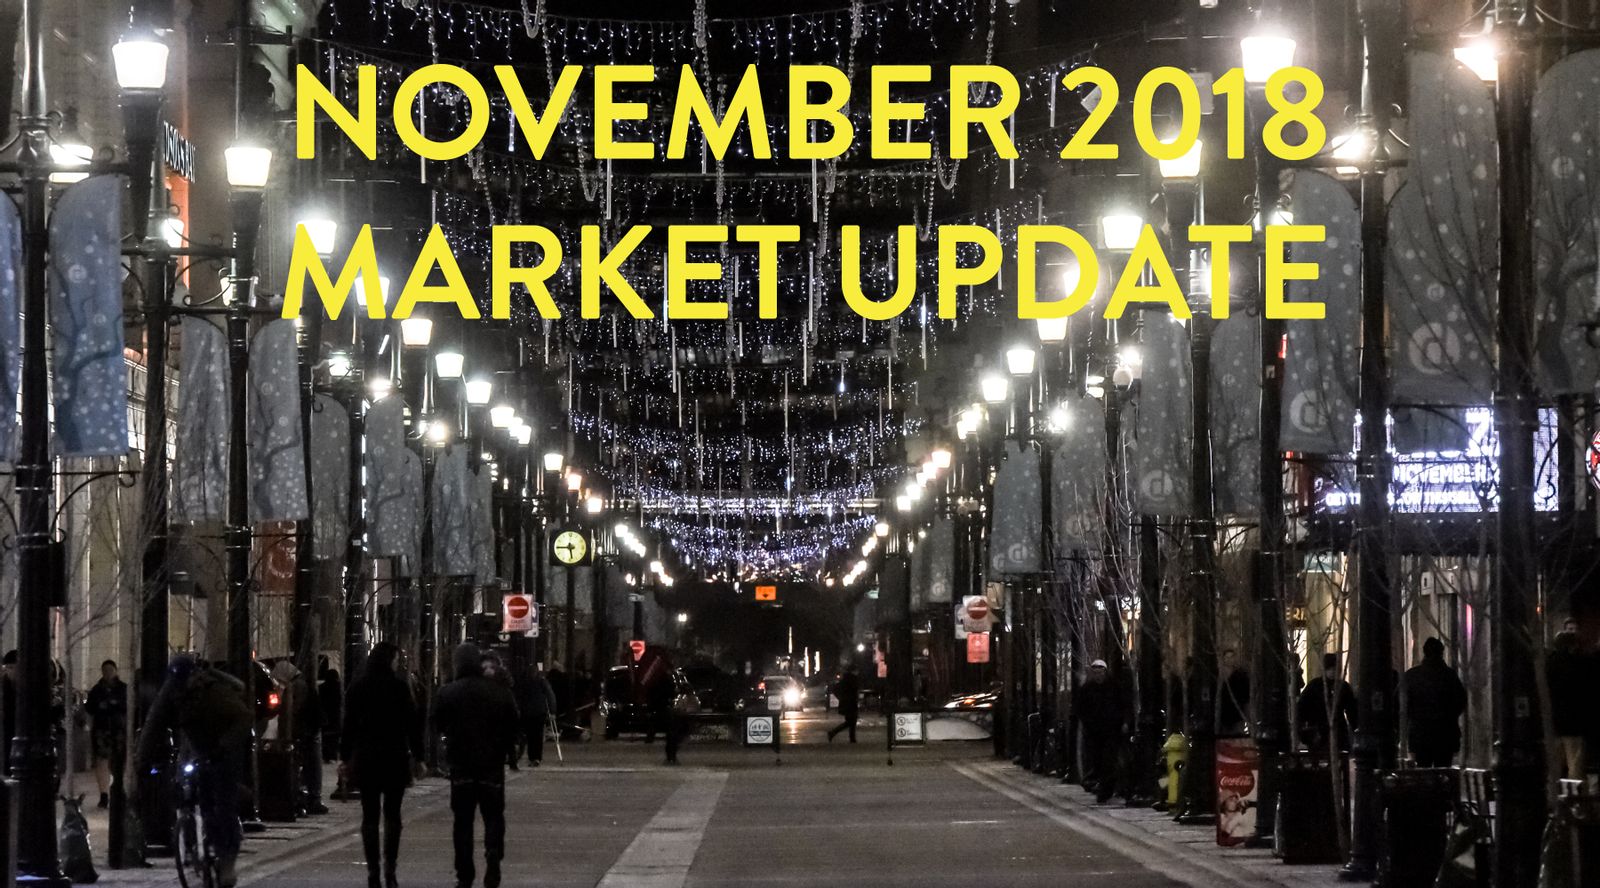 November 2018 Update - Challenging economic conditions continue to impact the resale market